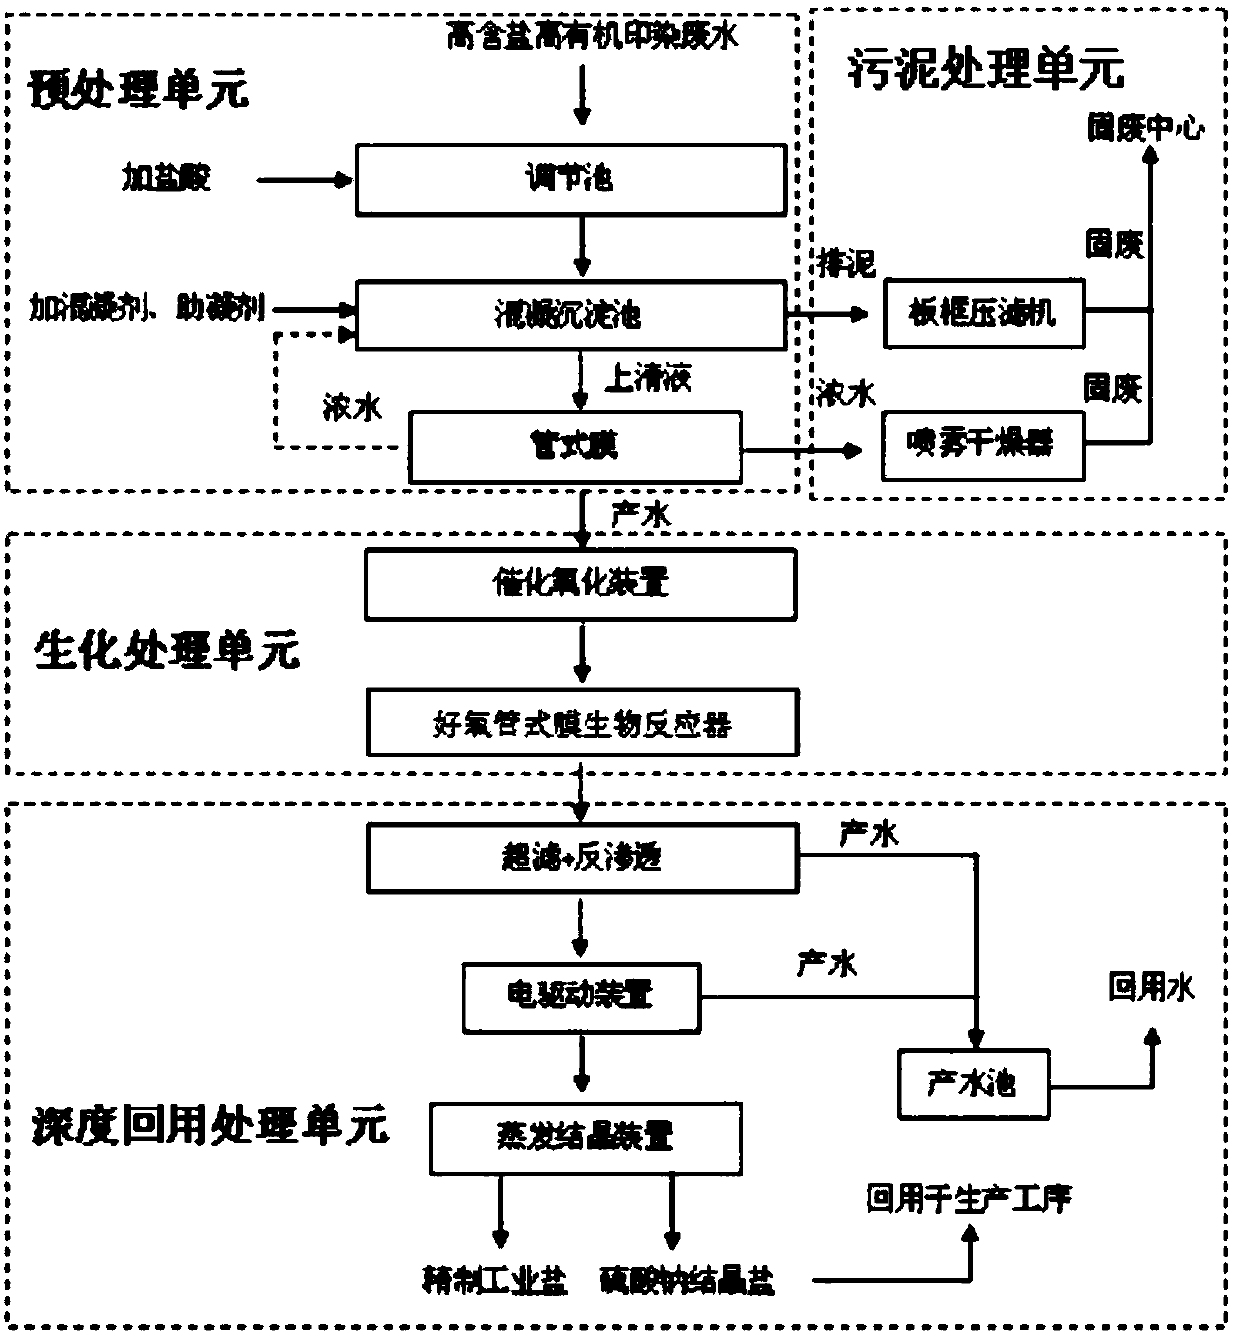 Tubular membrane based high concentration printing and dyeing waste water pretreatment integrated method